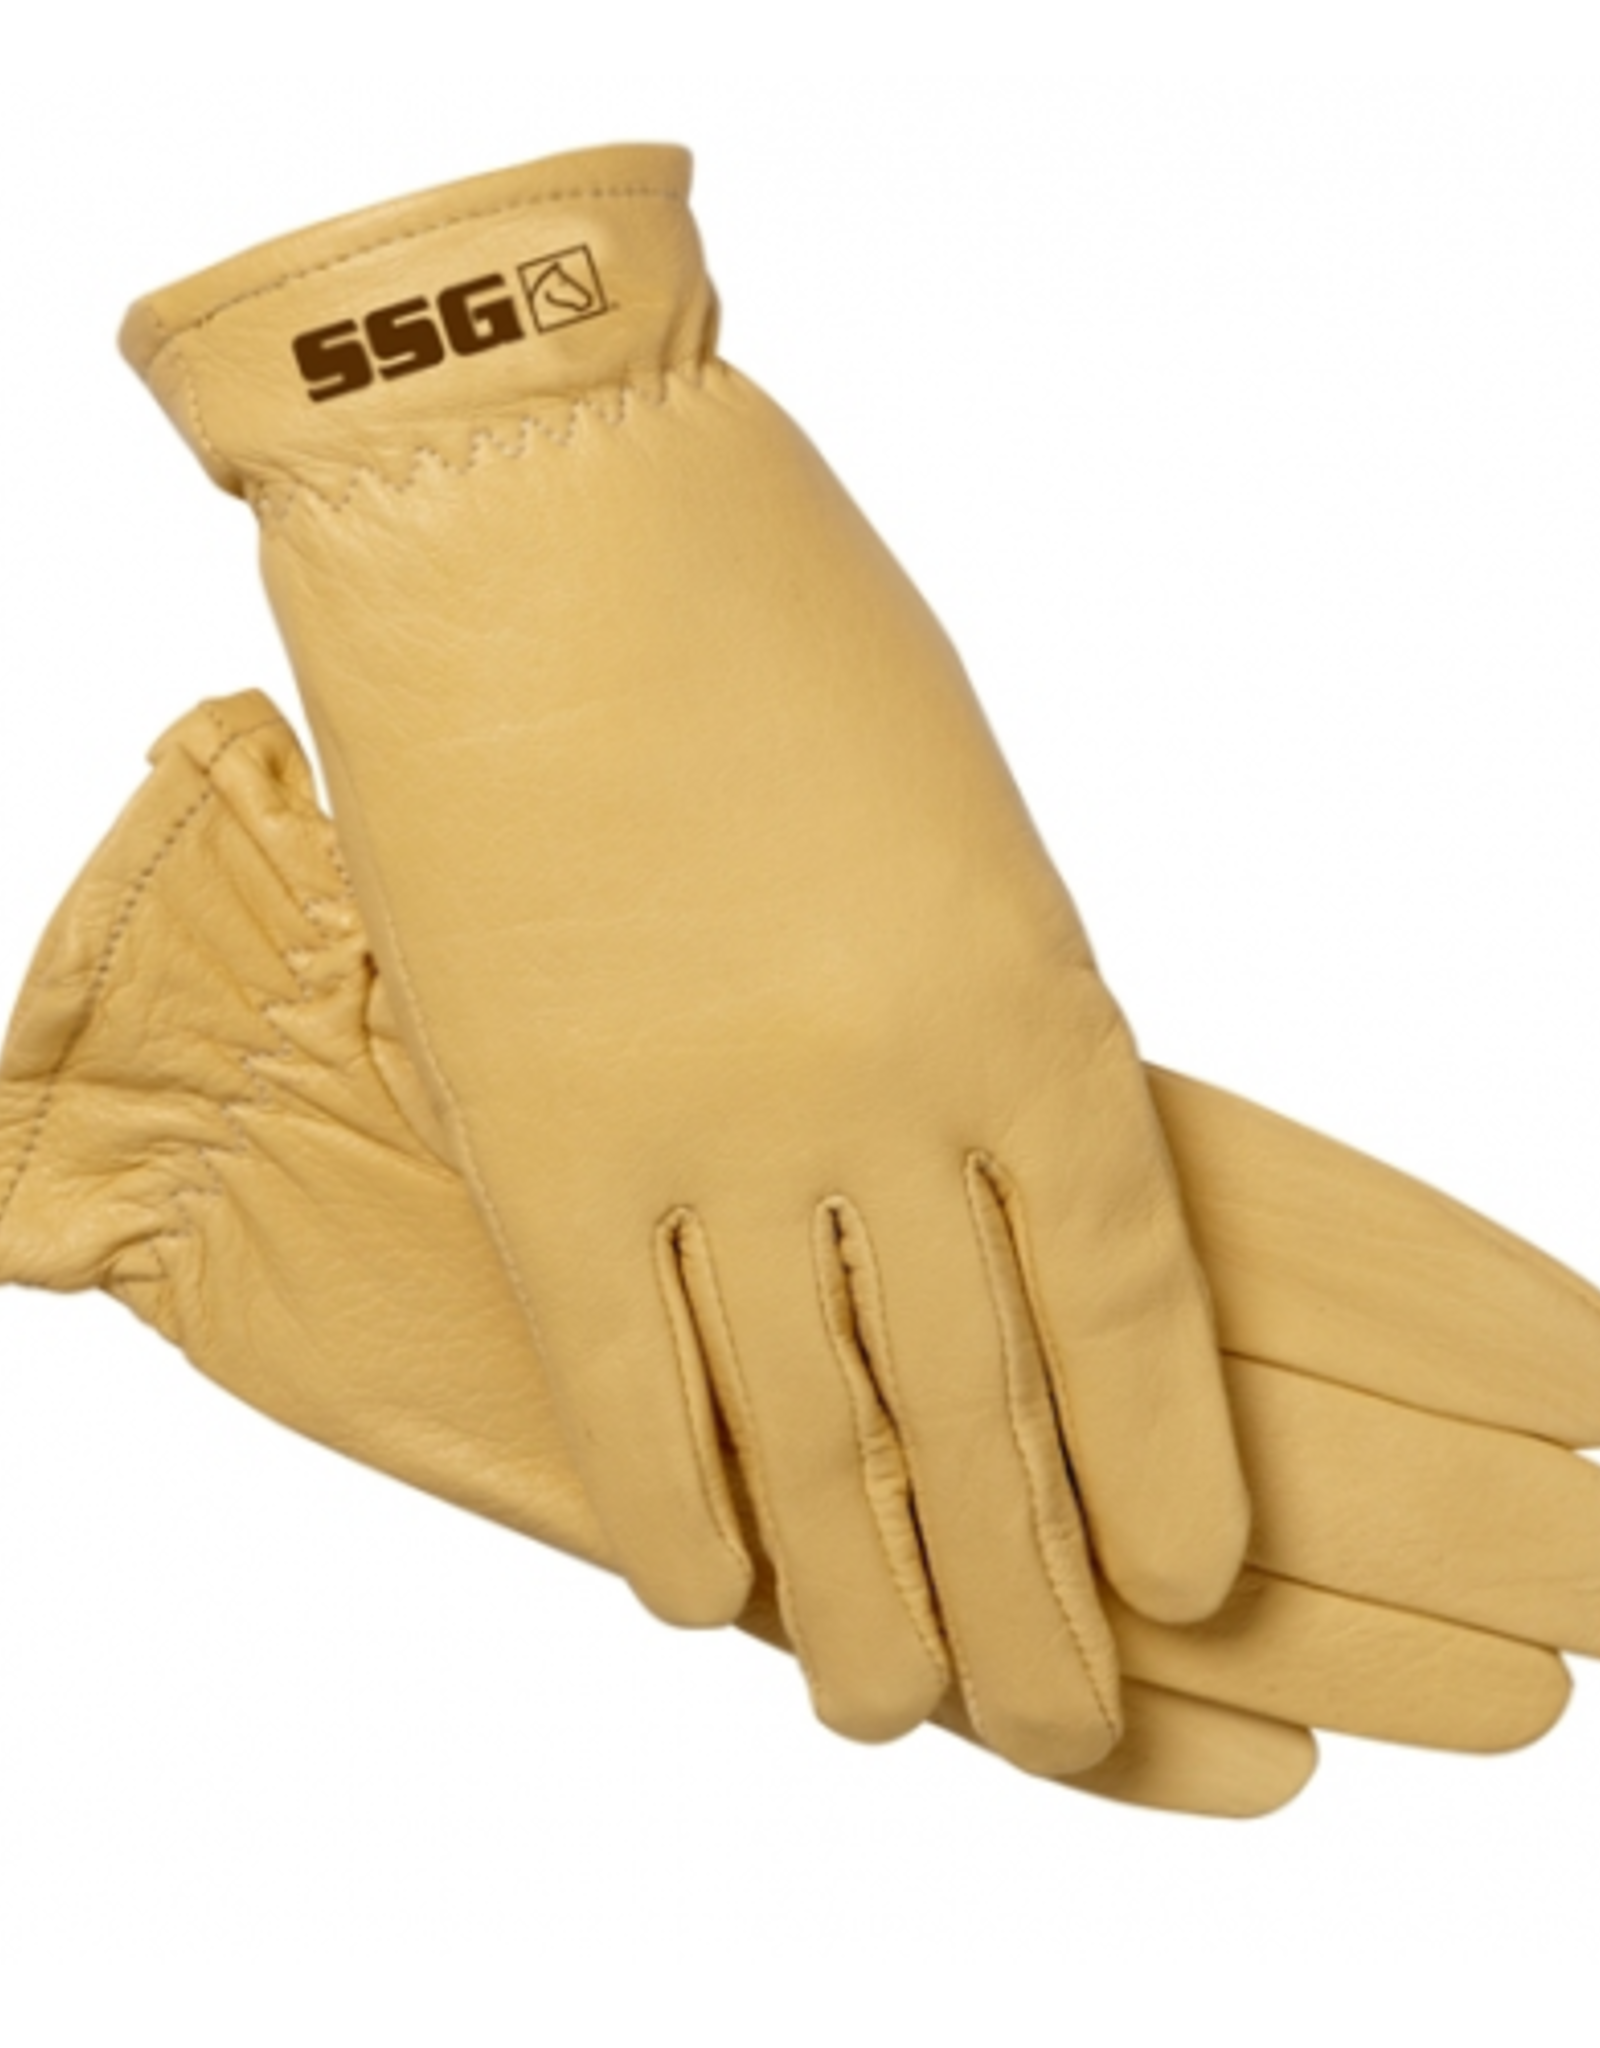 SSG Riding Rancher Leather Glove